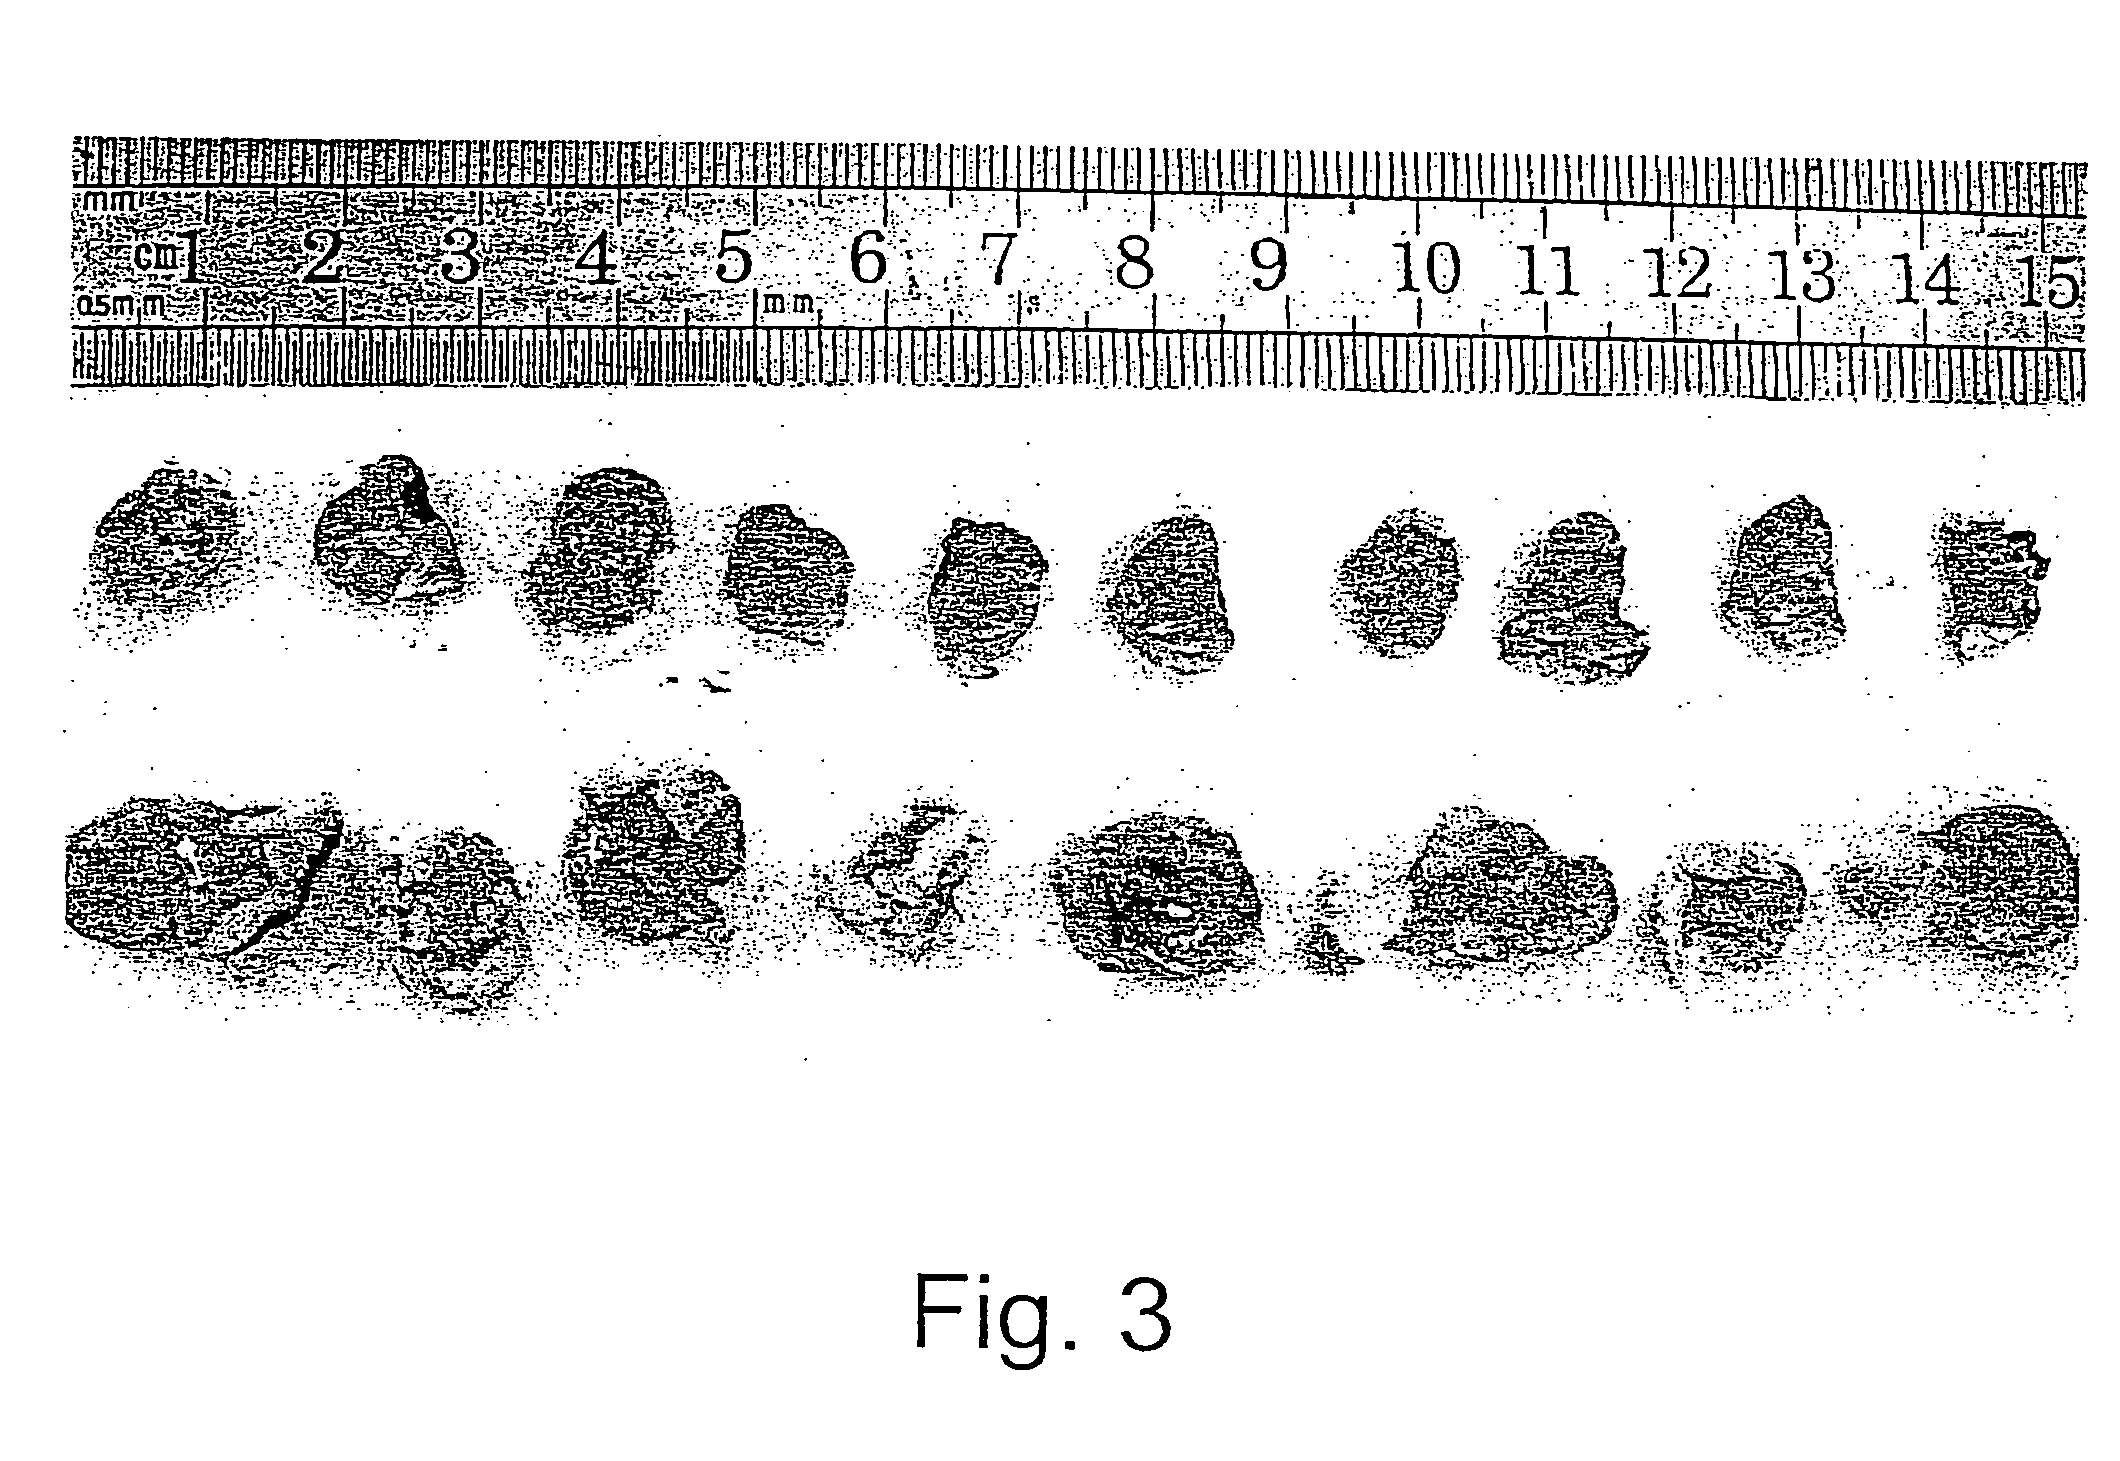 Methods and uses of leptin in immune modulation and hepatocellular carcinoma